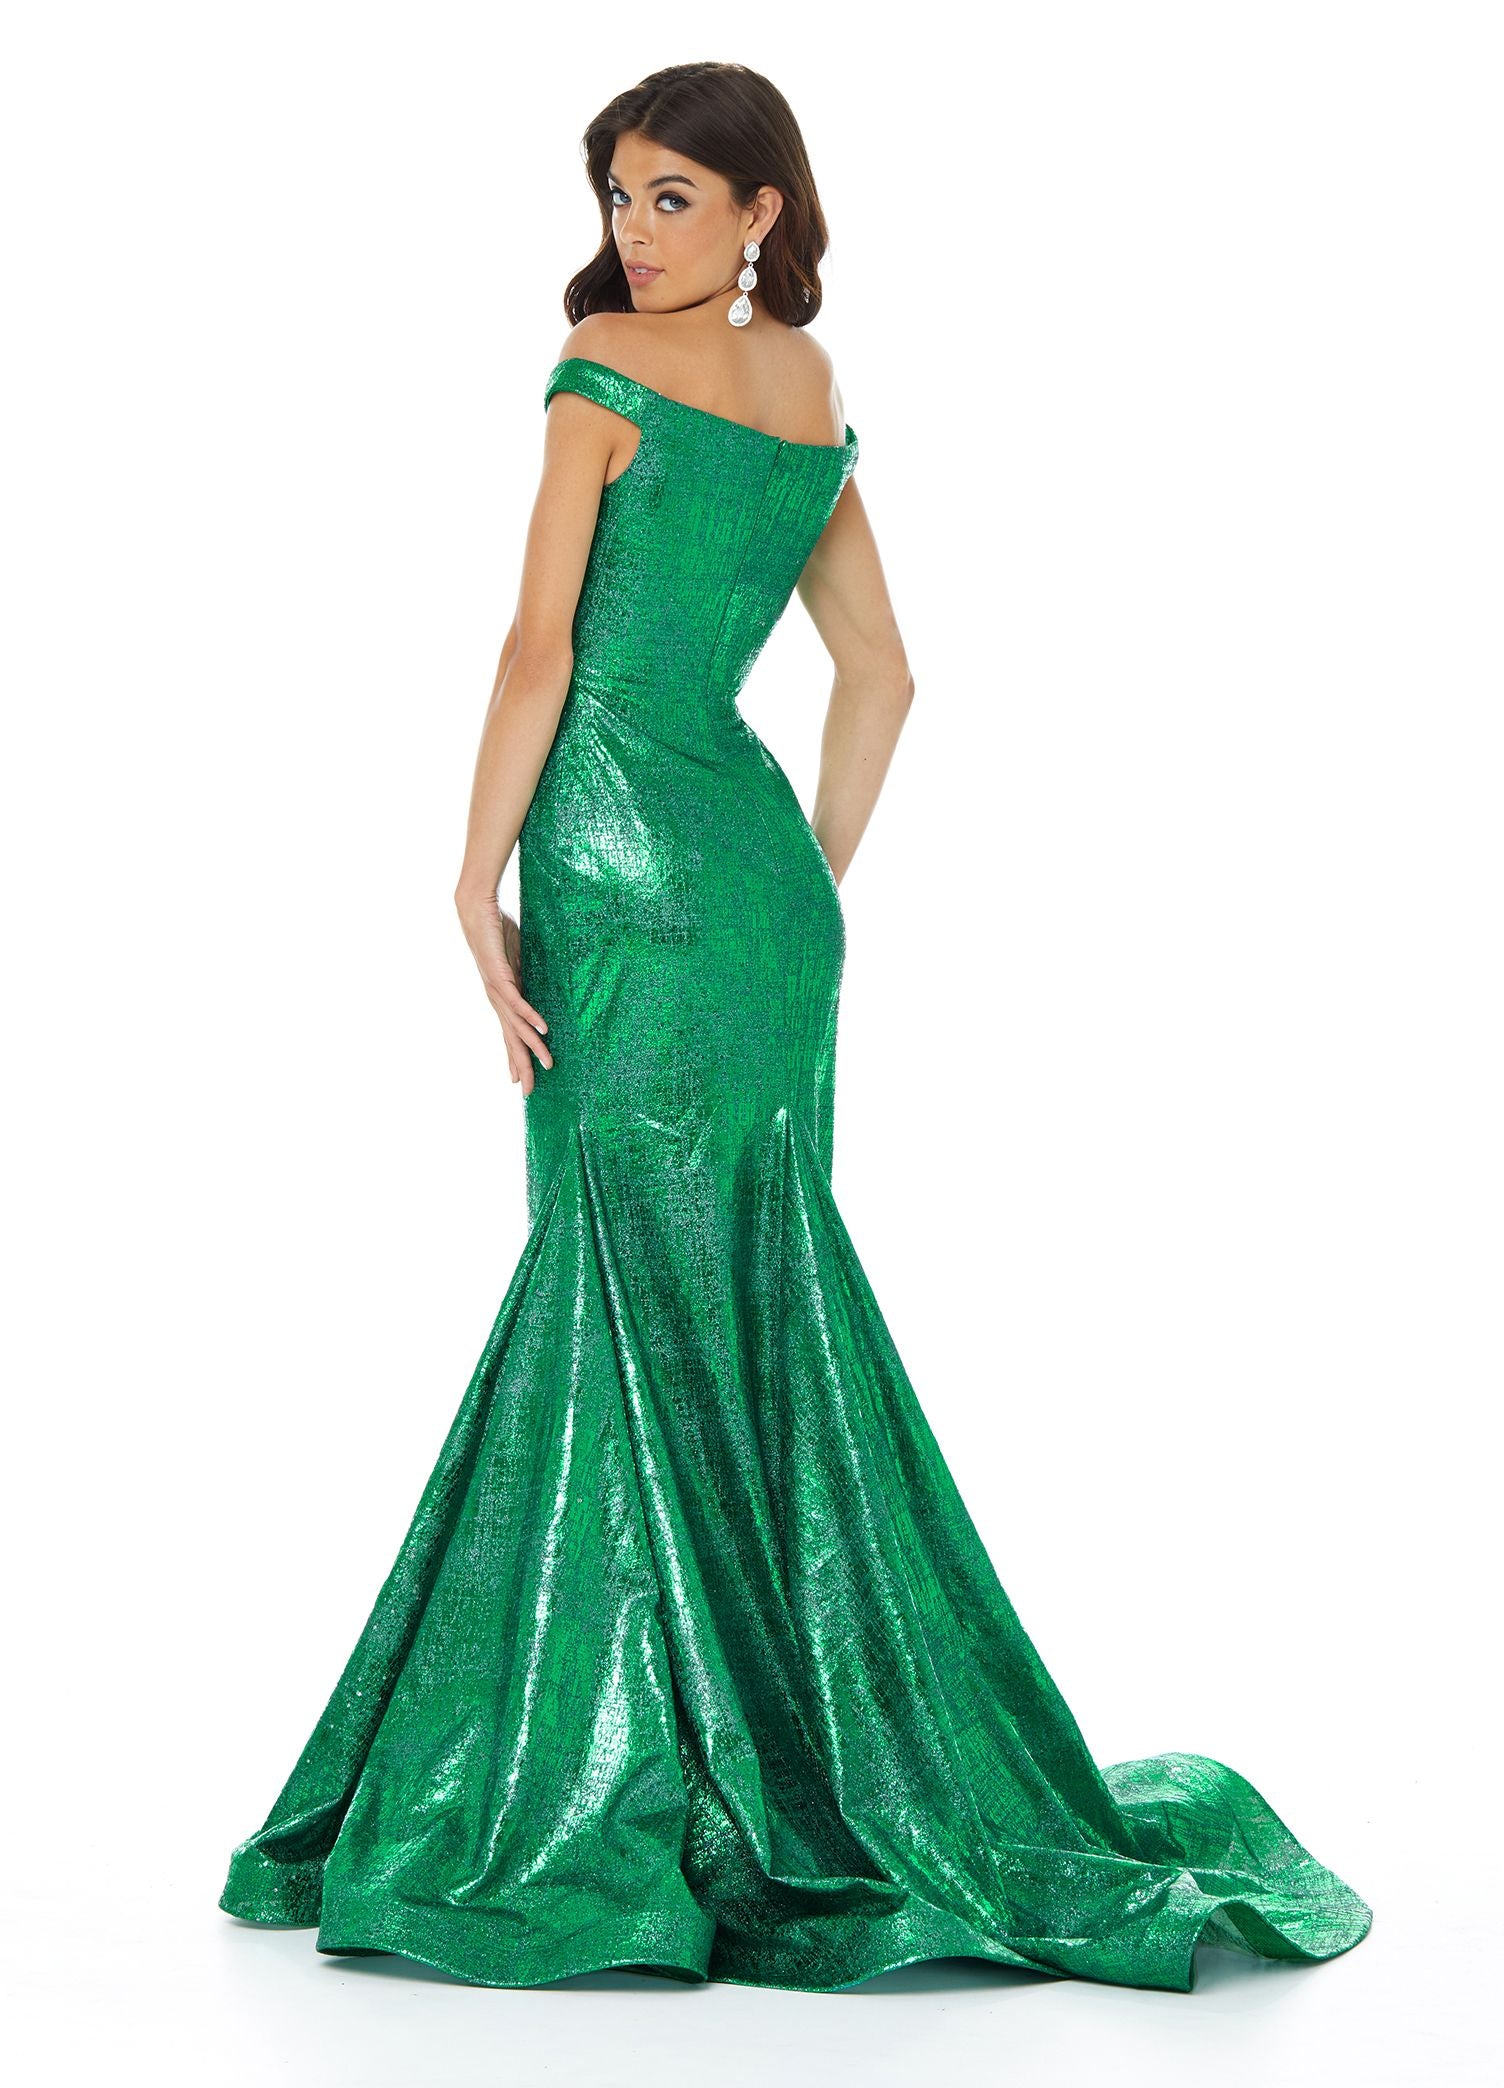 Ashley Lauren 11007 Let your curves do the talking in this off shoulder metallic jersey mermaid prom dress. The skirt on this evening pageant gown is finished with horsehair.  Colors  Emerald, Royal, Silver  Sizes 0, 2, 4, 6, 8, 10, 12, 14, 16, 18  Off Shoulder Metallic Jersey Mermaid Train